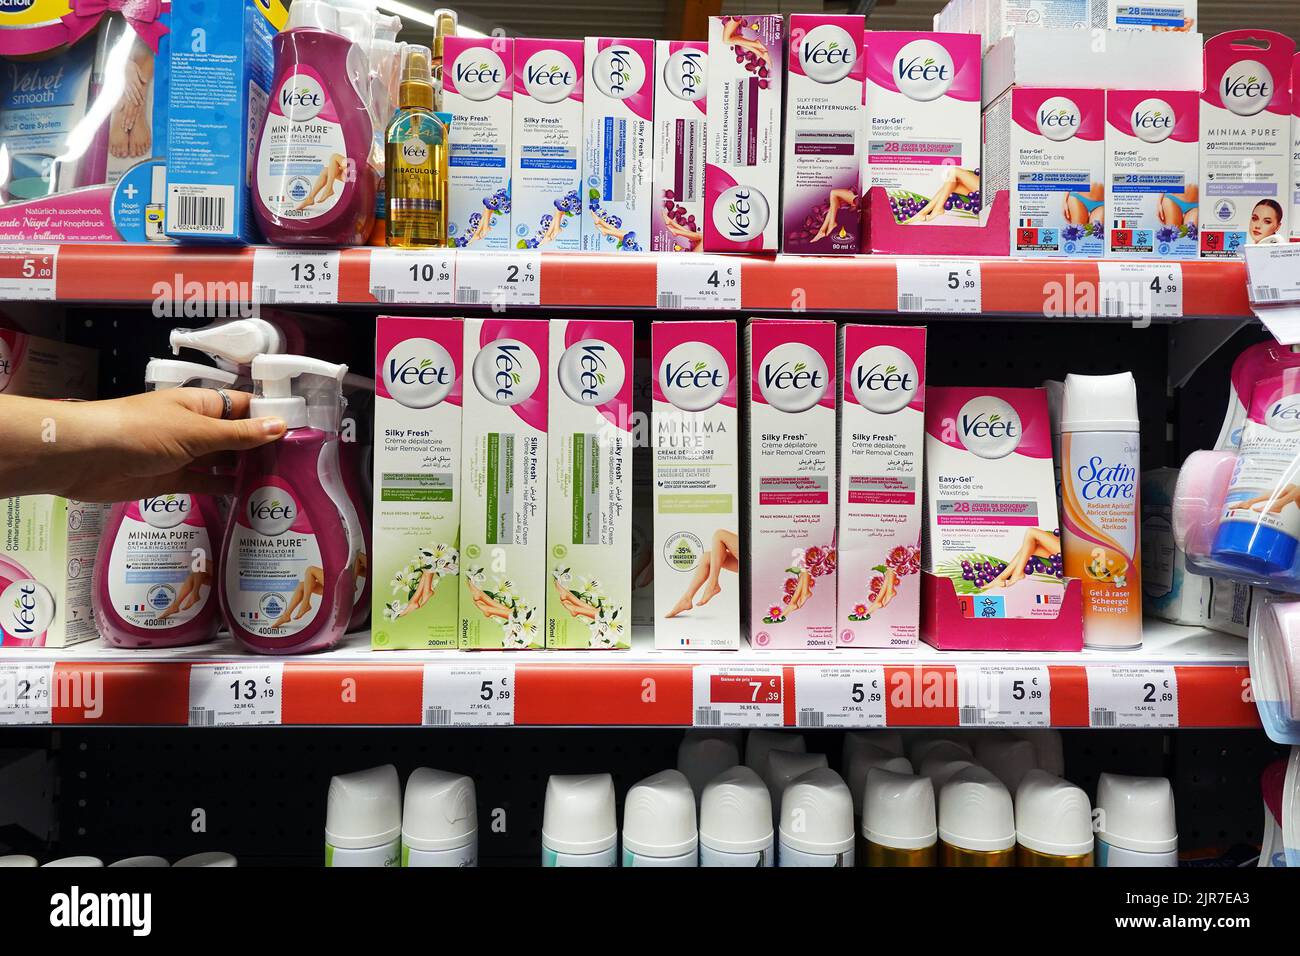 Veet Hair removal products in a shop Stock Photo